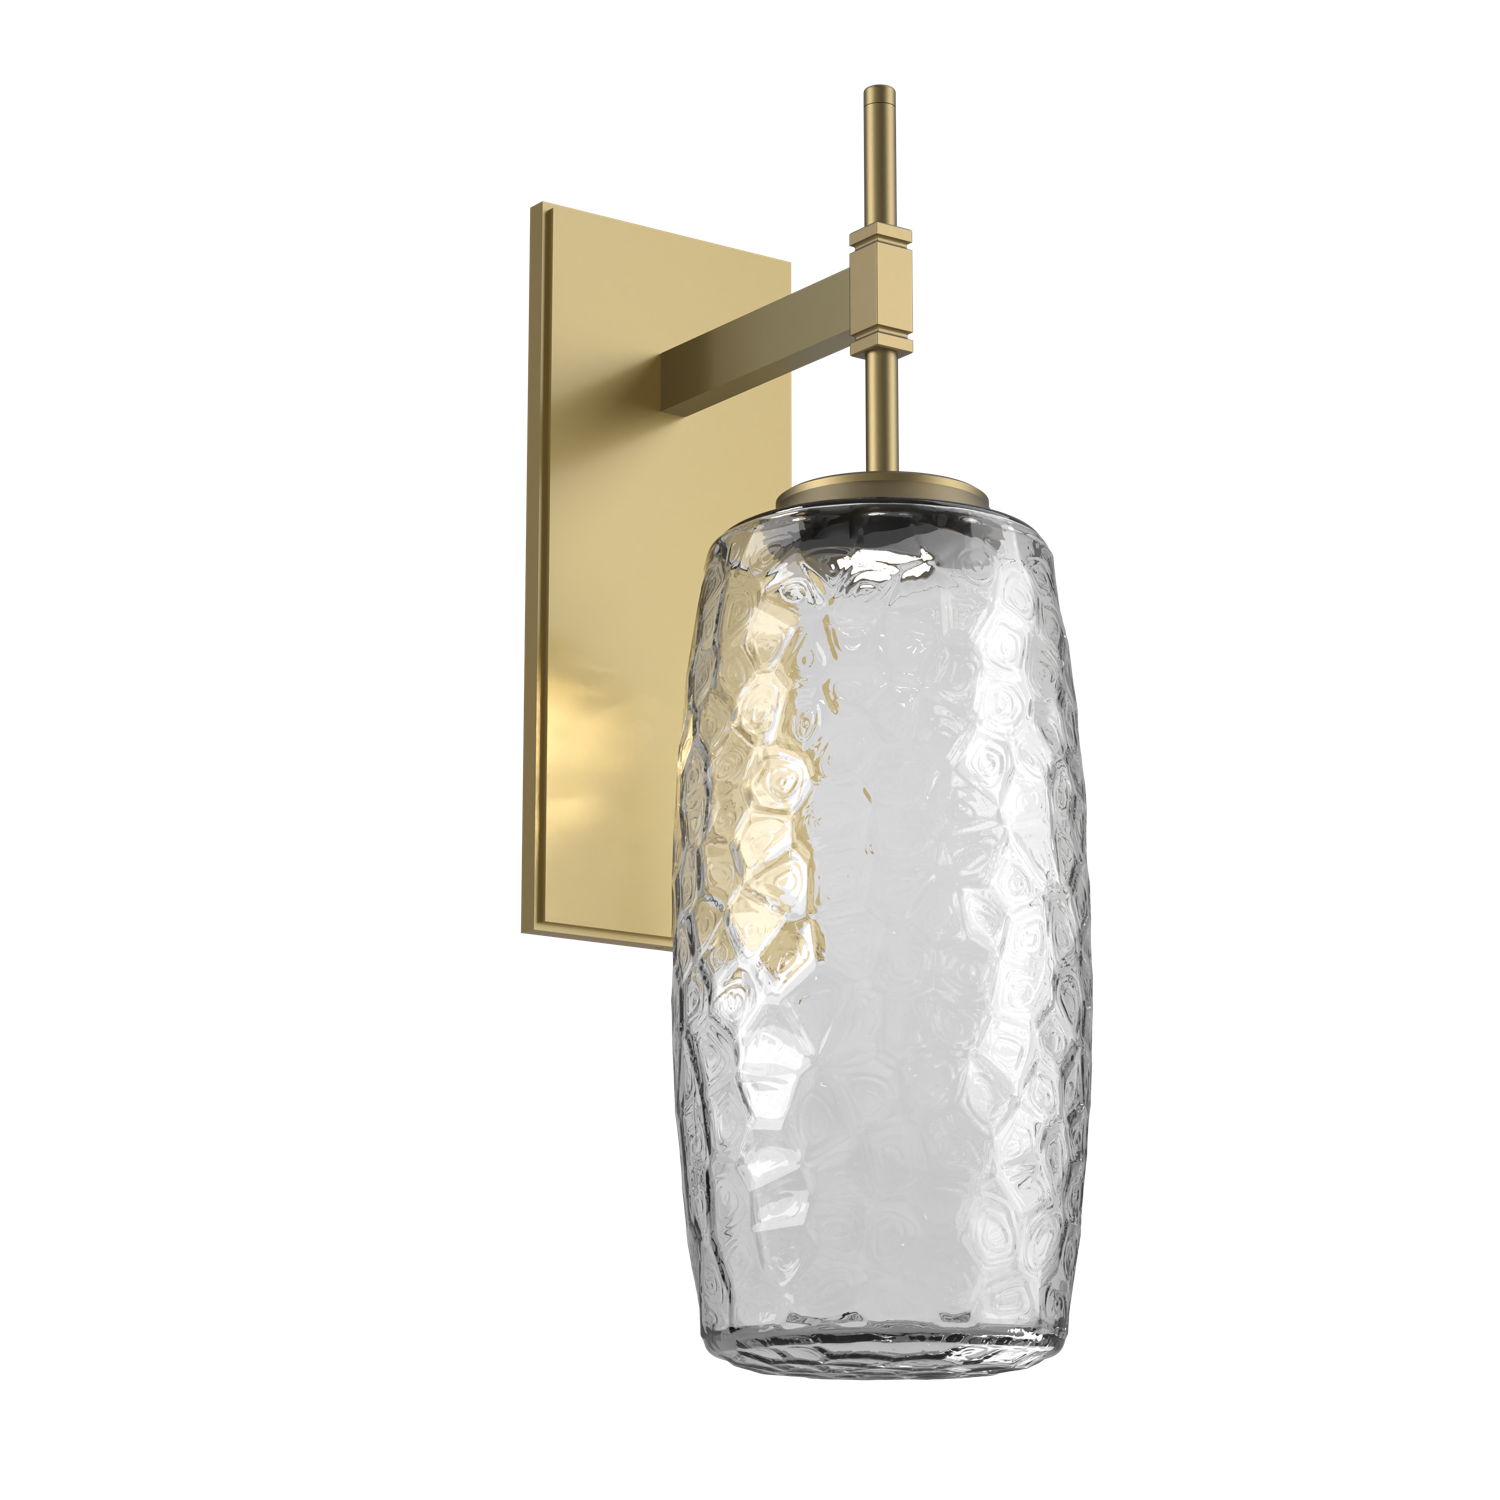 IDB0091-01-GB-C-Hammerton-Studio-Vessel-tempo-wall-sconce-with-gilded-brass-finish-and-clear-blown-glass-shades-and-LED-lamping